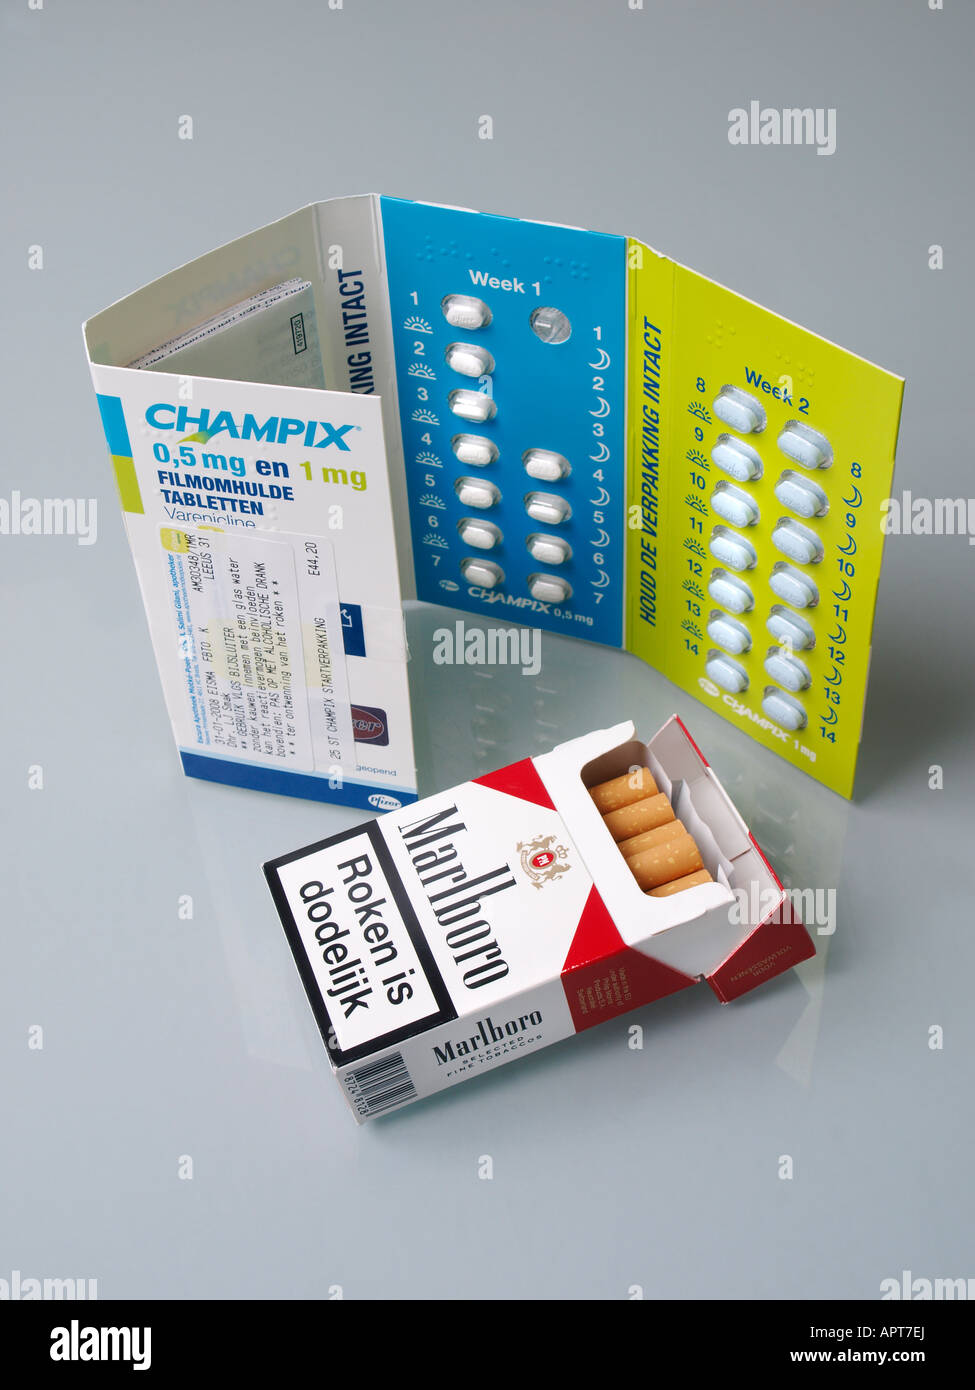 Champix by Pfizer a new medicine drug to quit stop smoking with a pack of Marlboro cigarettes Stock Photo